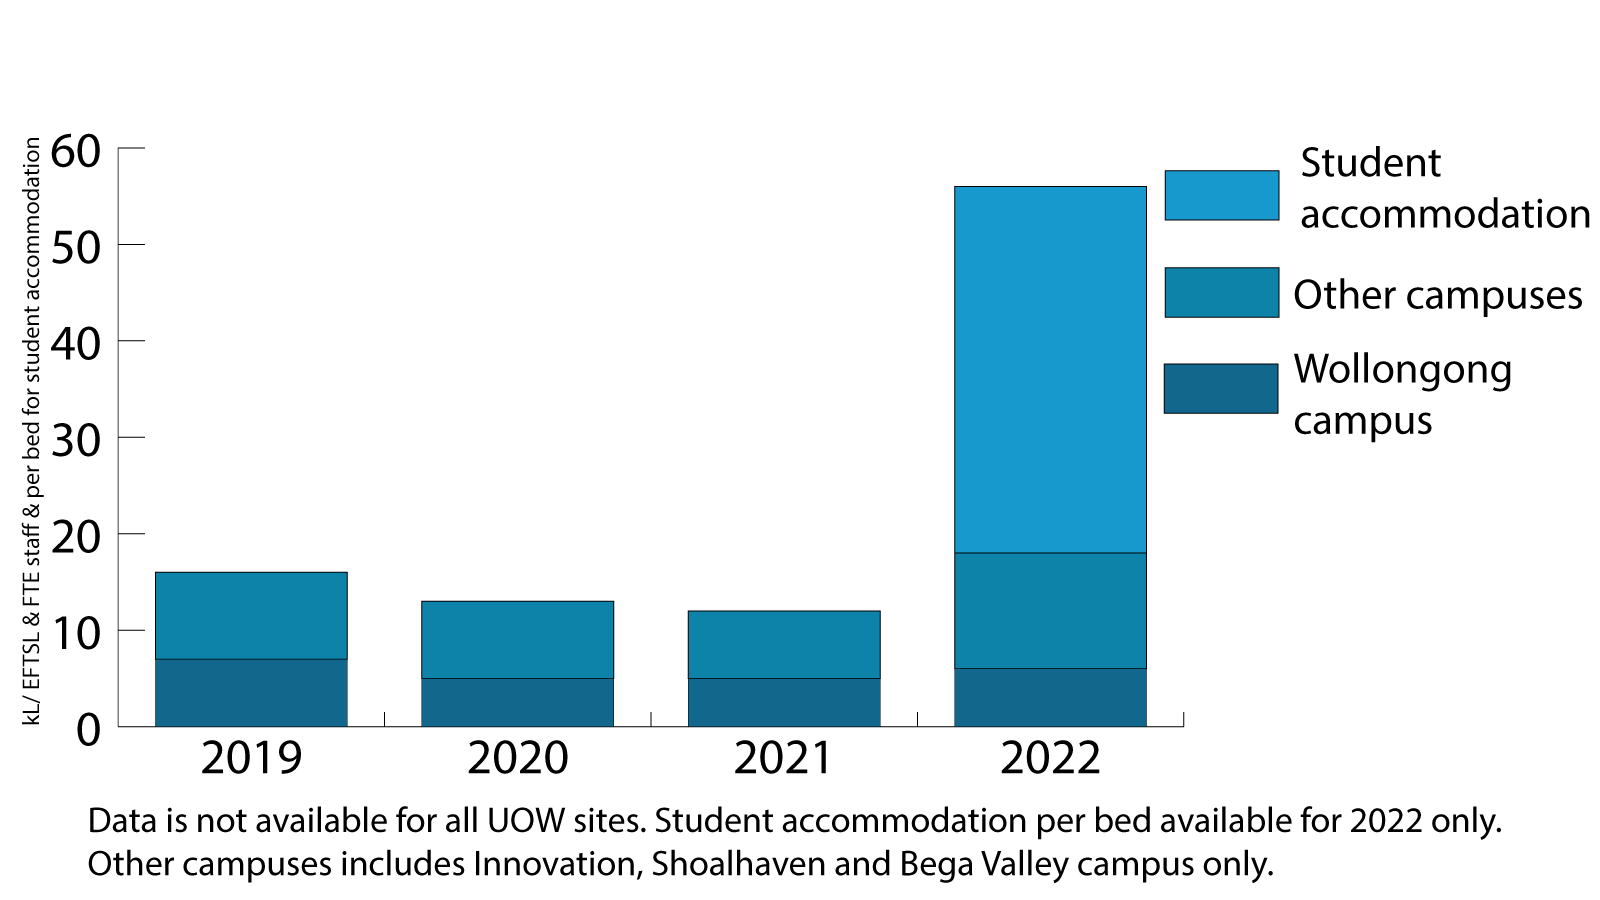 This graph shows the per person (Equivalent full time student and staff and per bed for student accommodation) for 2019 to 2022.  Campuses included are Wollongong, Innovation, Bega Valley and Shoalhaven campus.  Data is not available for all sites. Per bed information is only available for 2022.